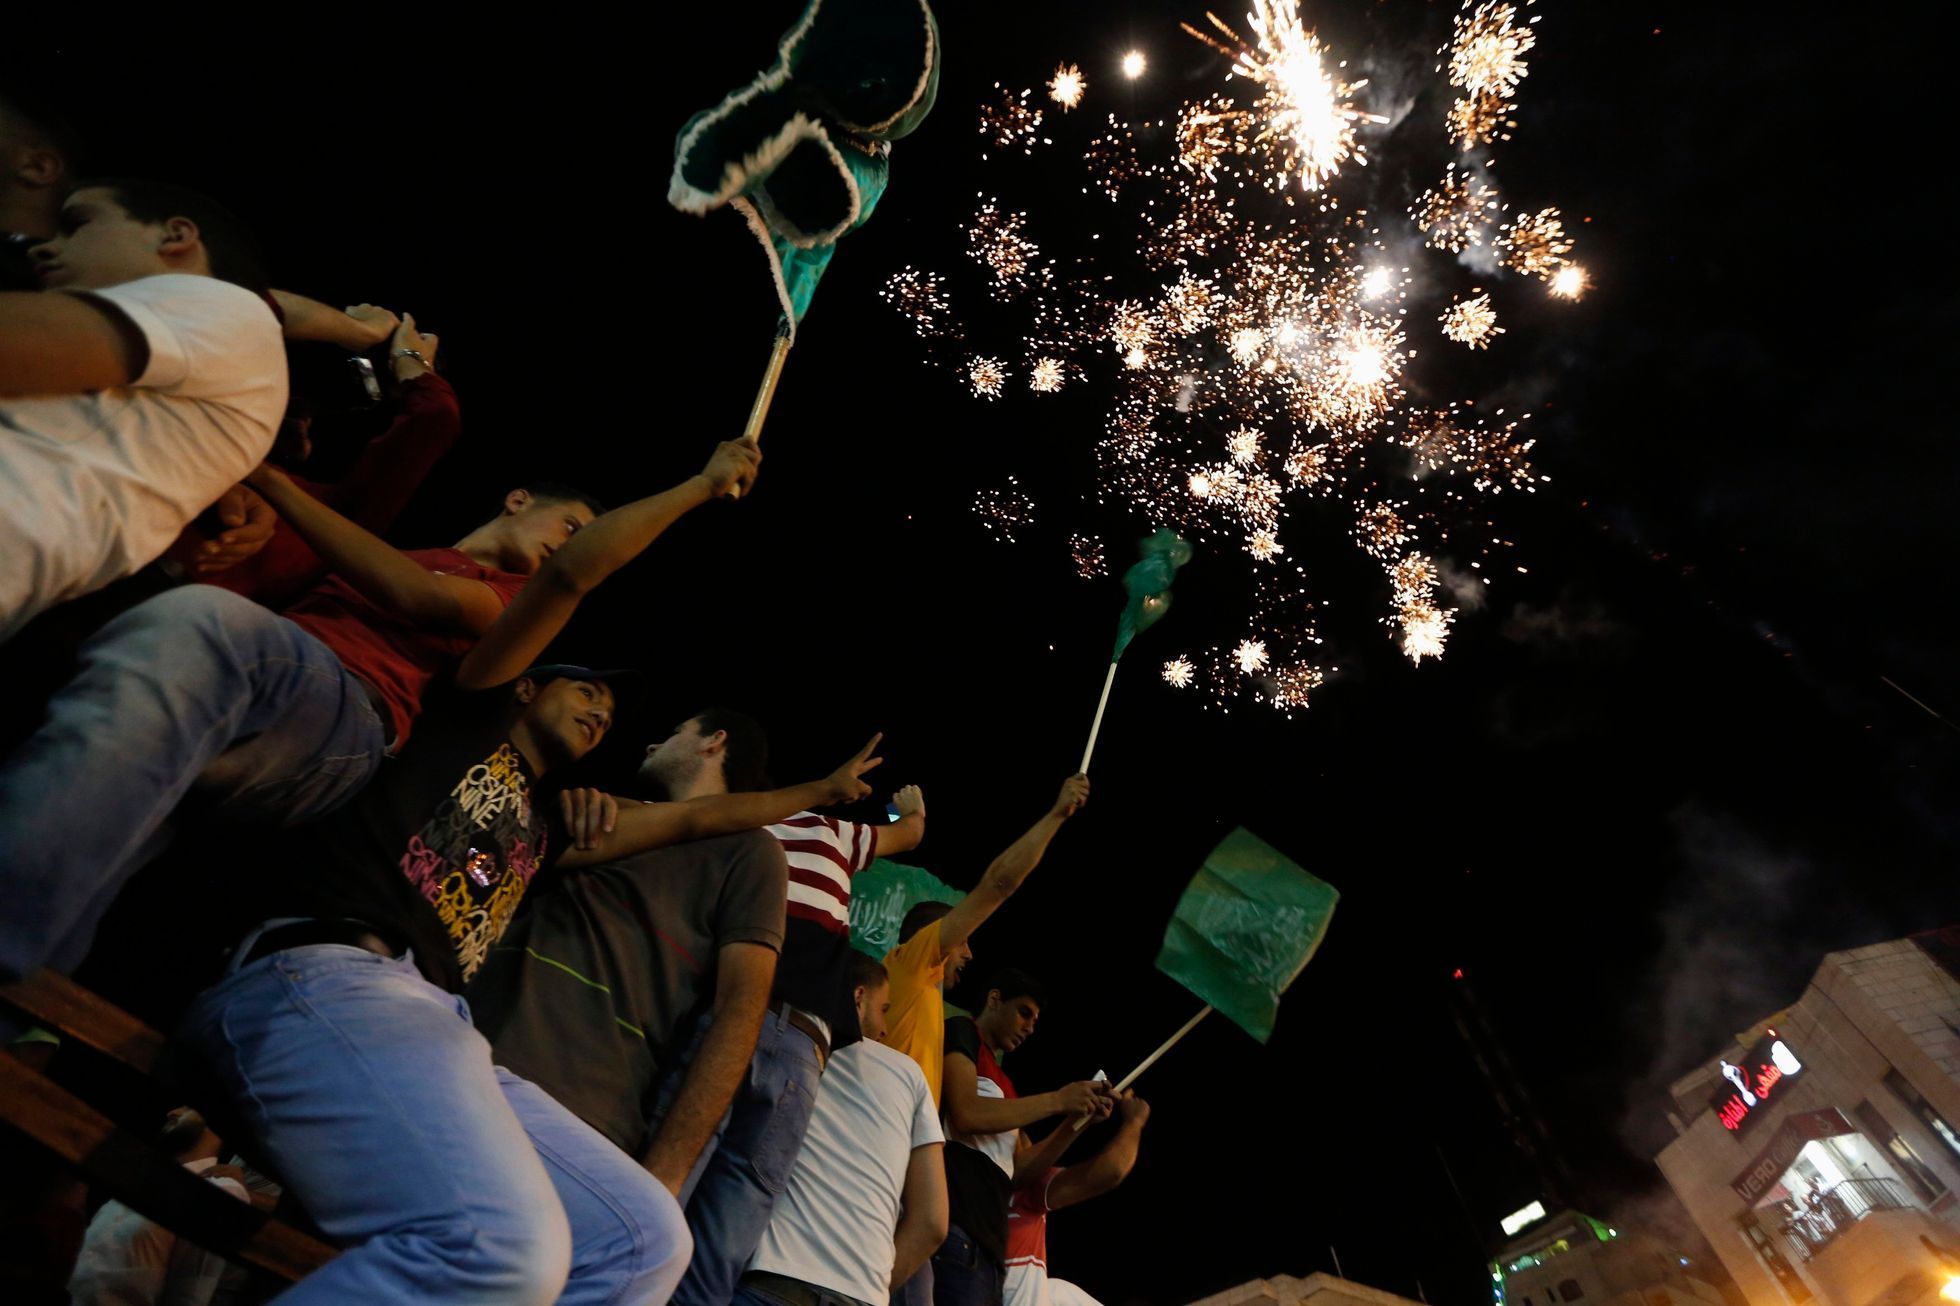 Palestinians release fireworks as they celebrate what they said was a victory by Palestinians in Gaza over Israel following a ceasefire, in the West Bank city of Ramallah